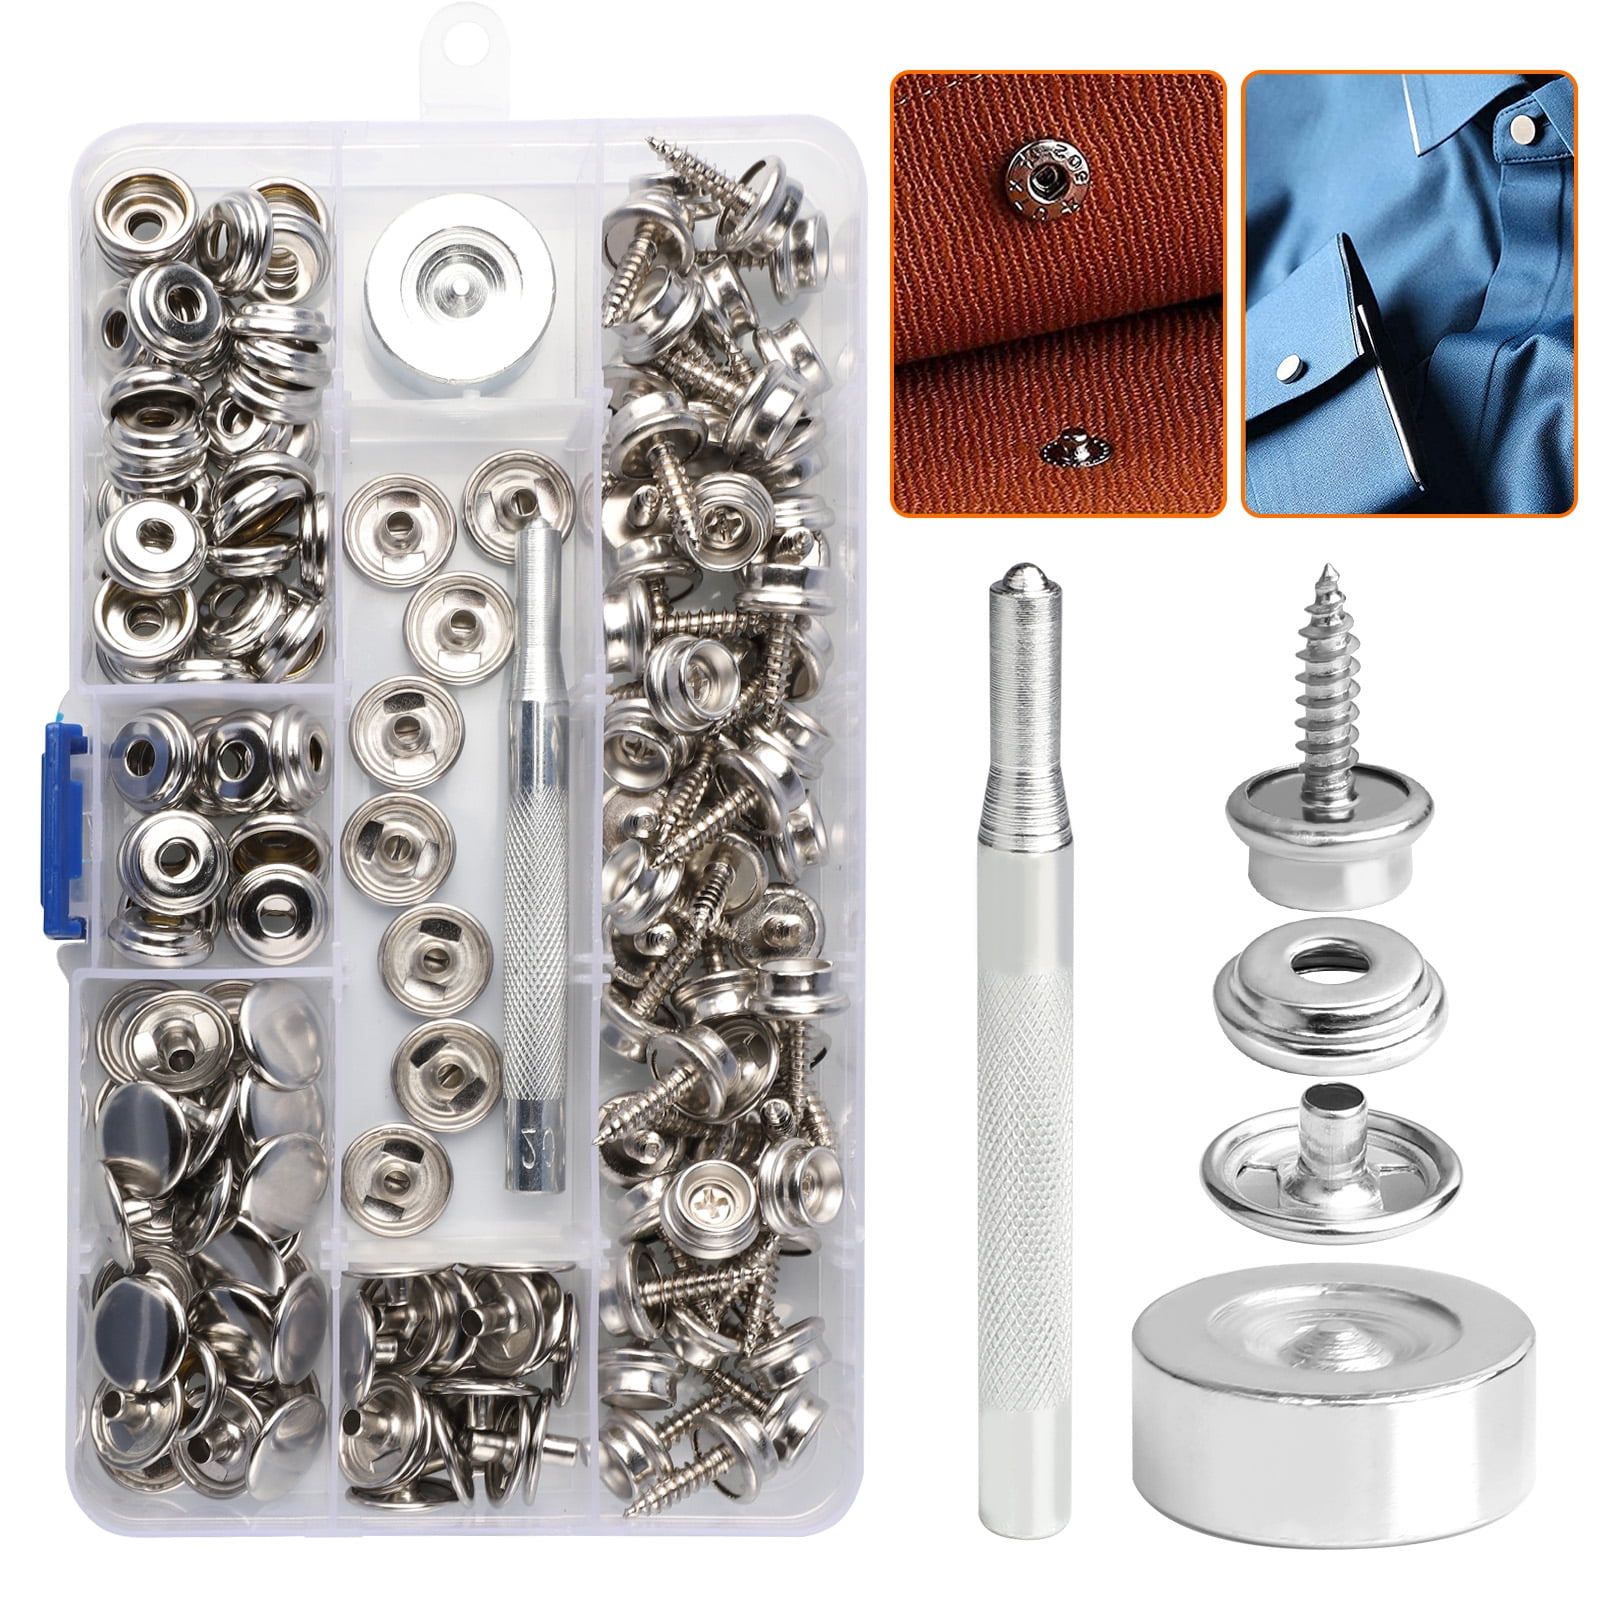 180/360 Sets Professional Snap Fasteners Kit Tool 8mm Metal Button